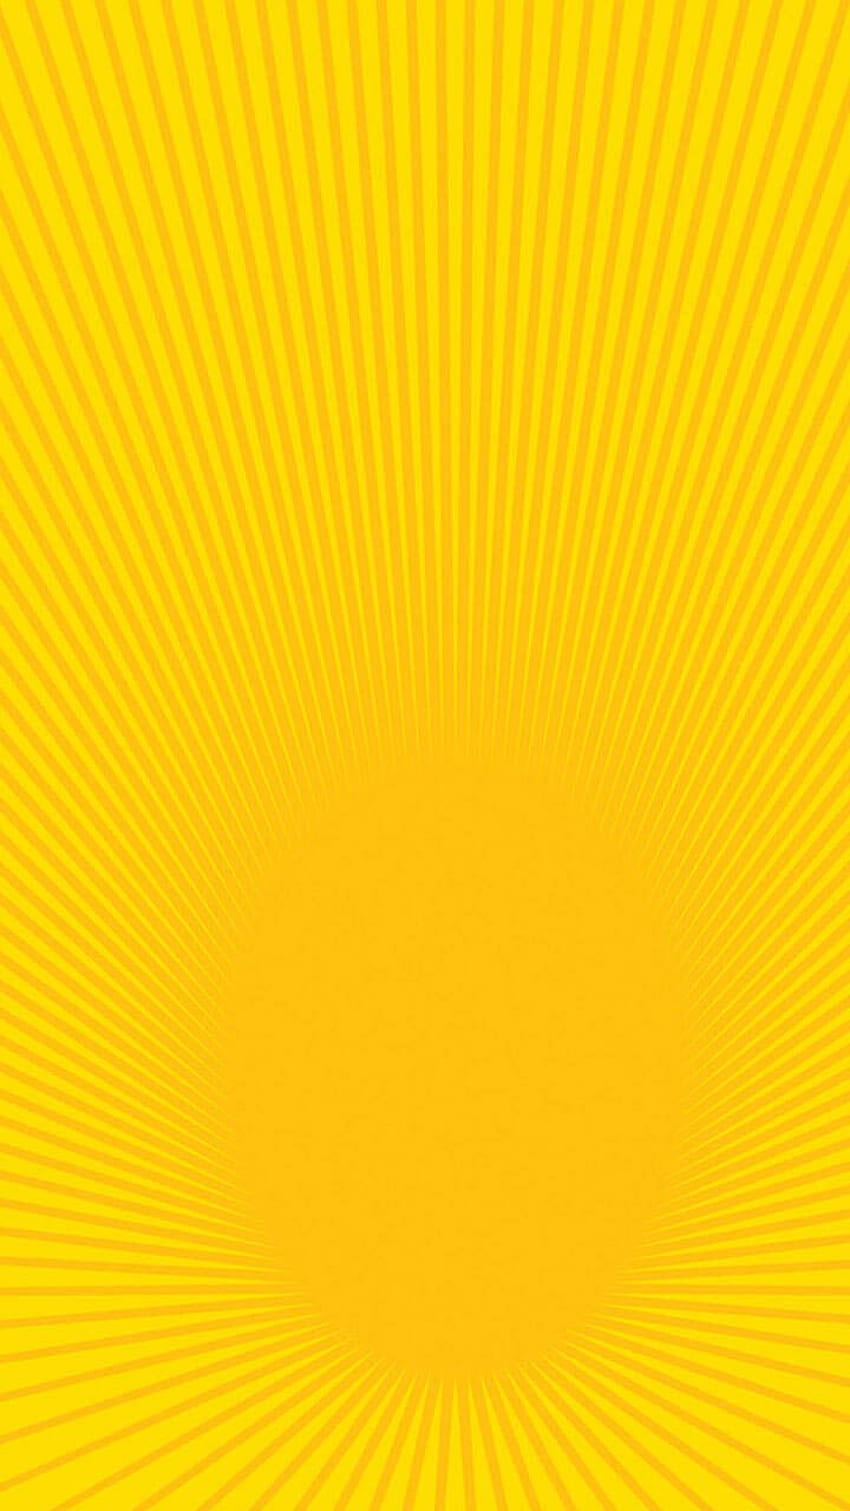 Yellow 161. Cool for phones, Yellow , Banner background , Yellow Banner HD phone wallpaper